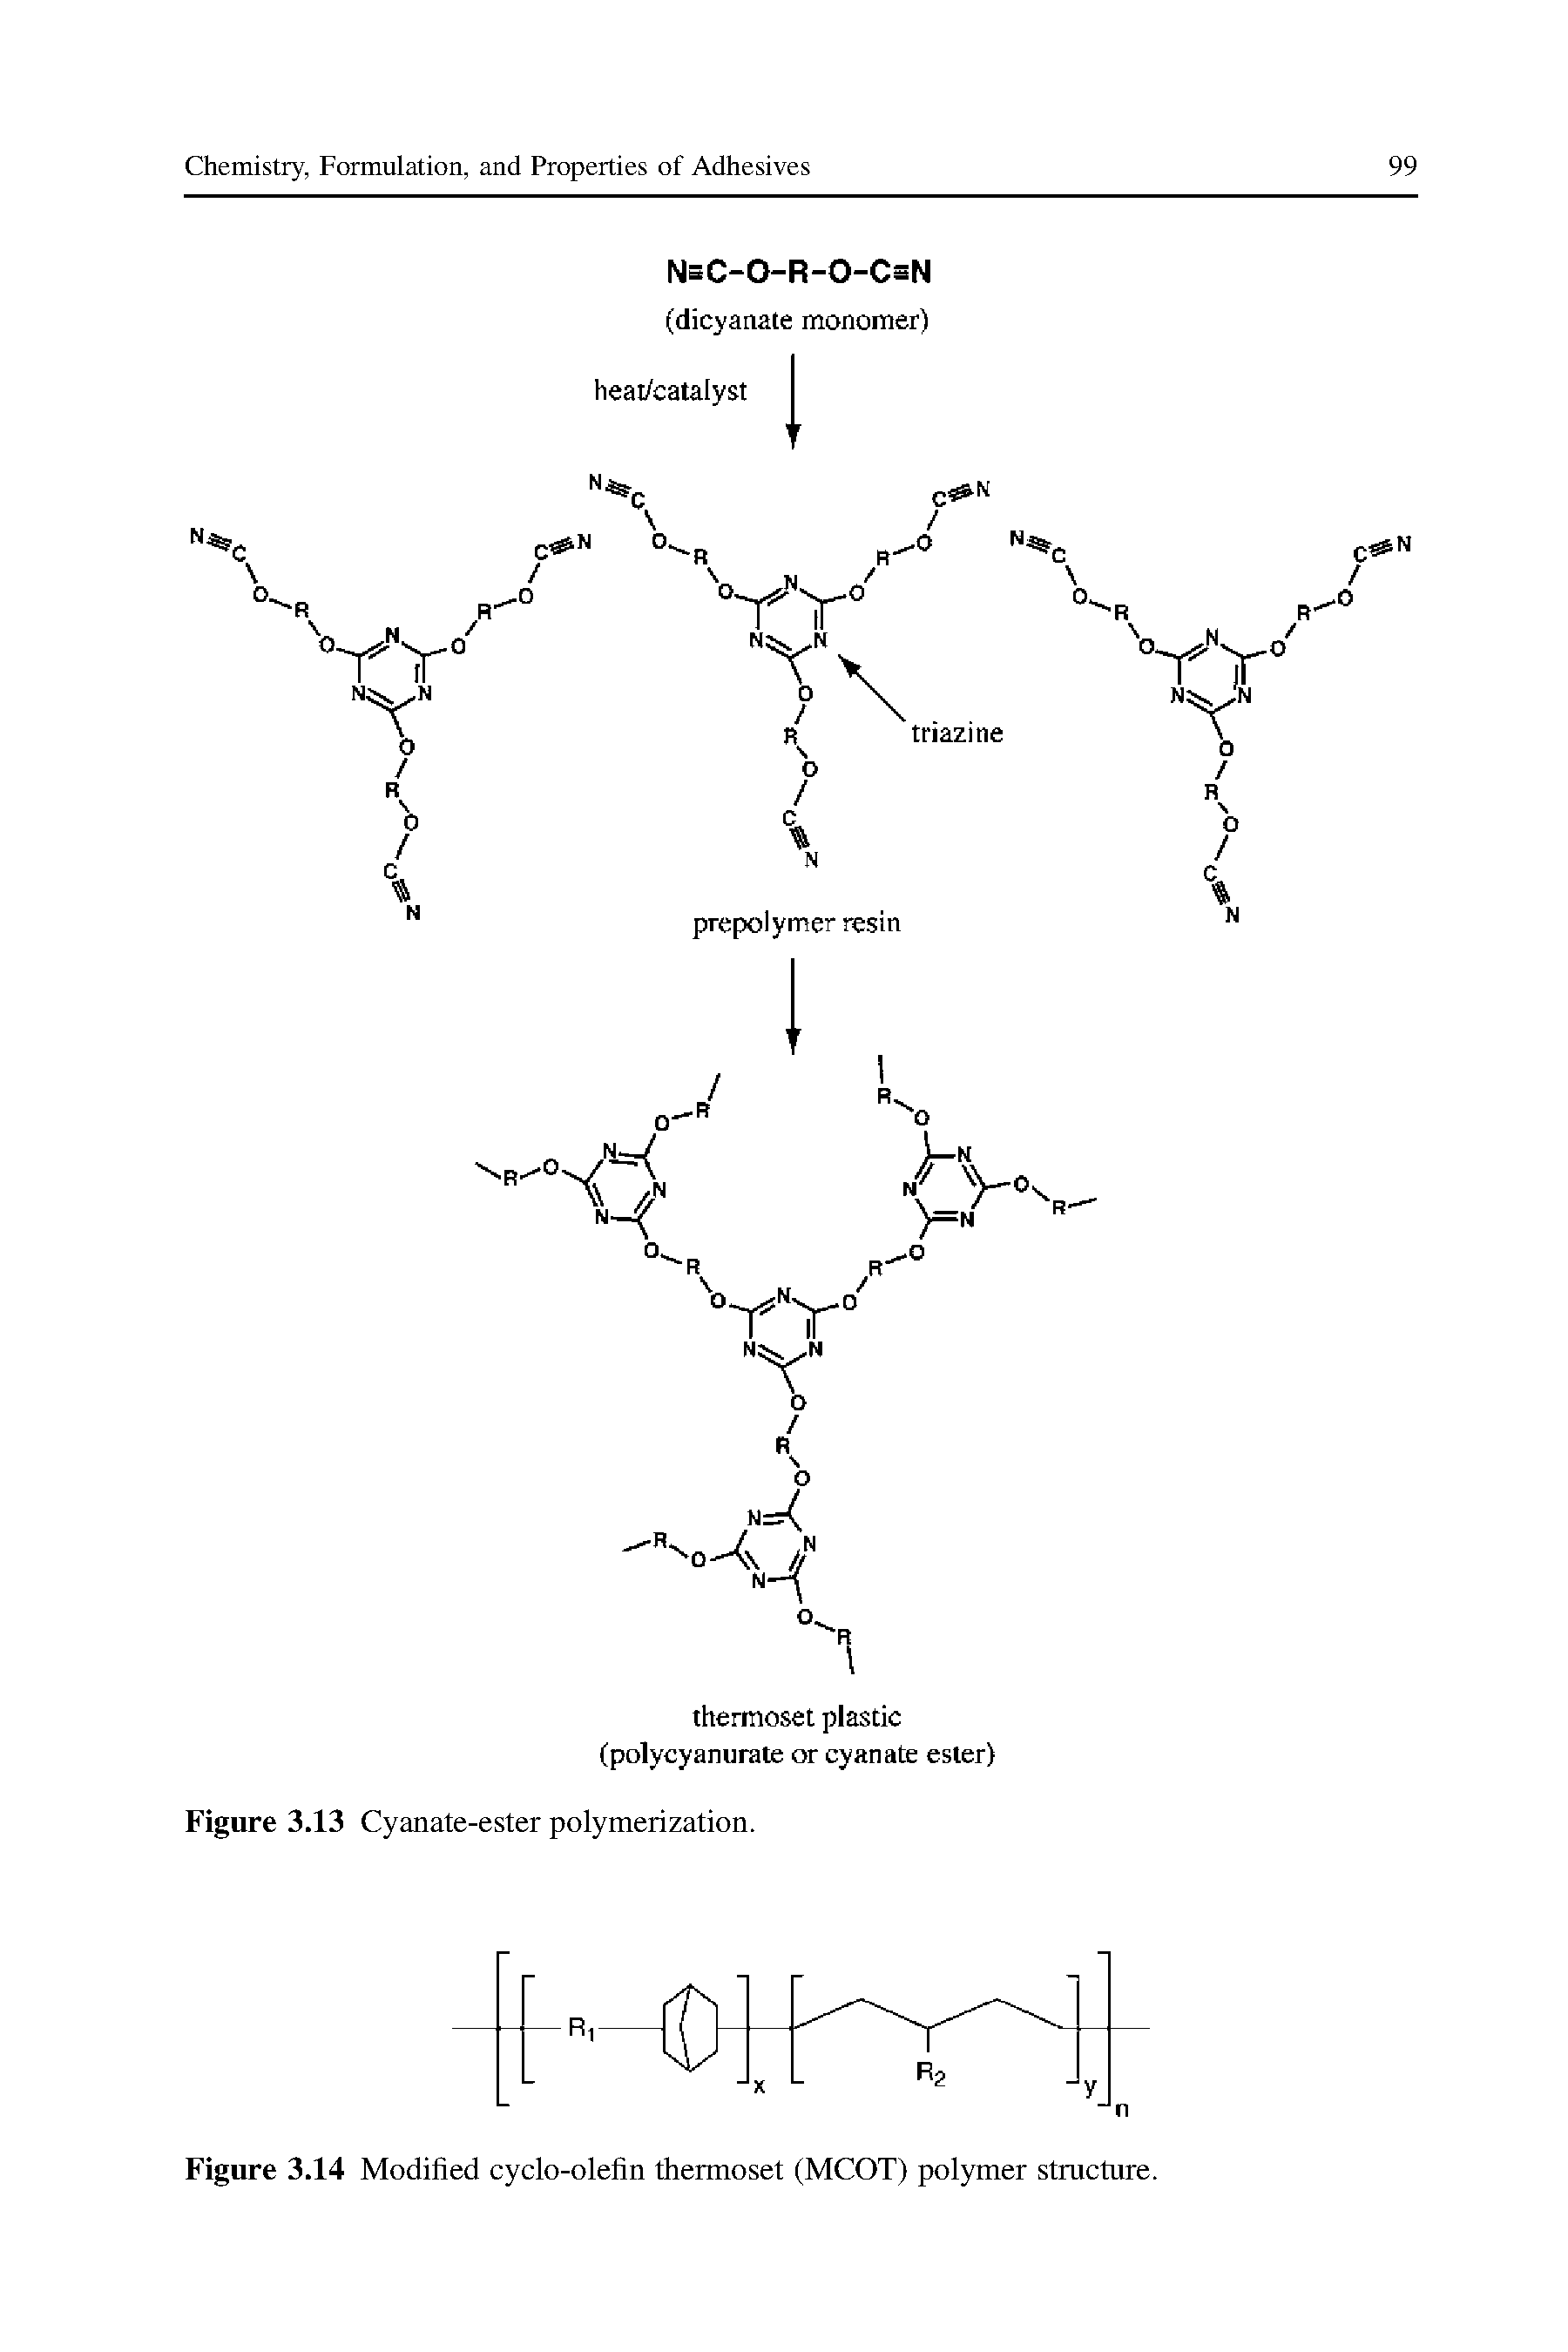 Figure 3.14 Modified cyclo-olefin thermoset (MCOT) polymer structure.